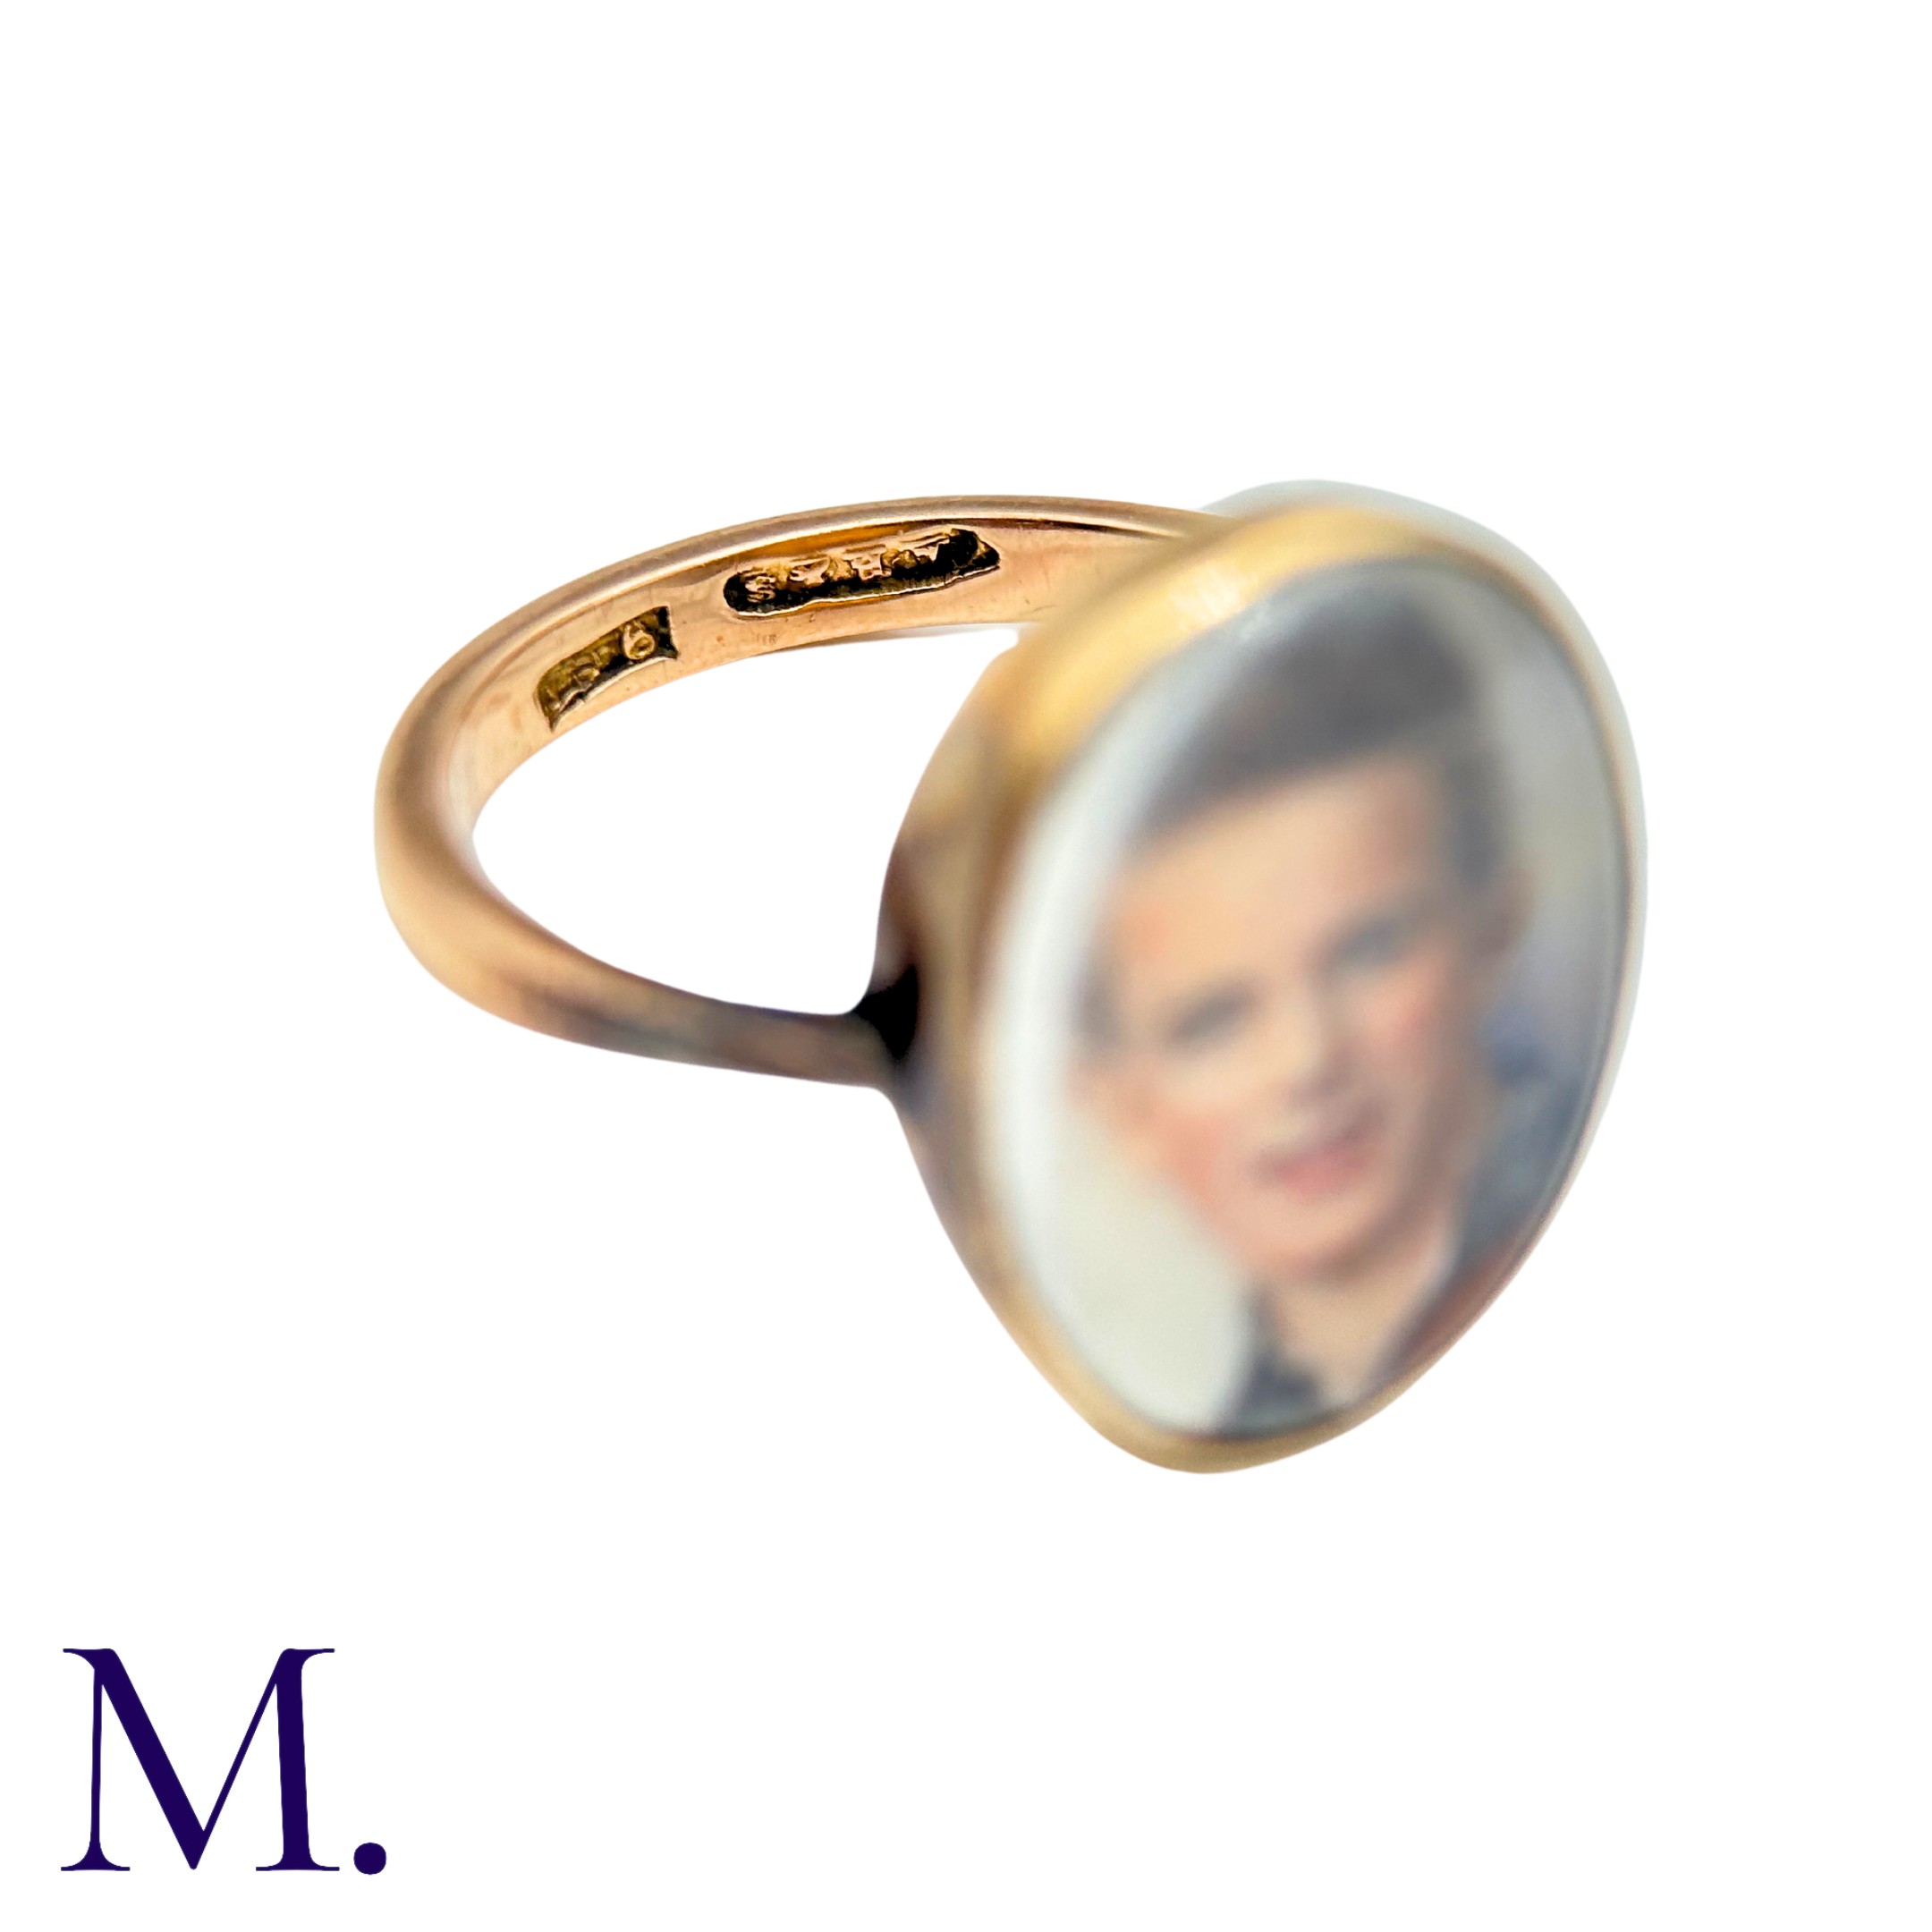 A Portrait Ring in 9k yellow gold, set with a portrait of a young man behind a glass face. Marked - Image 3 of 4